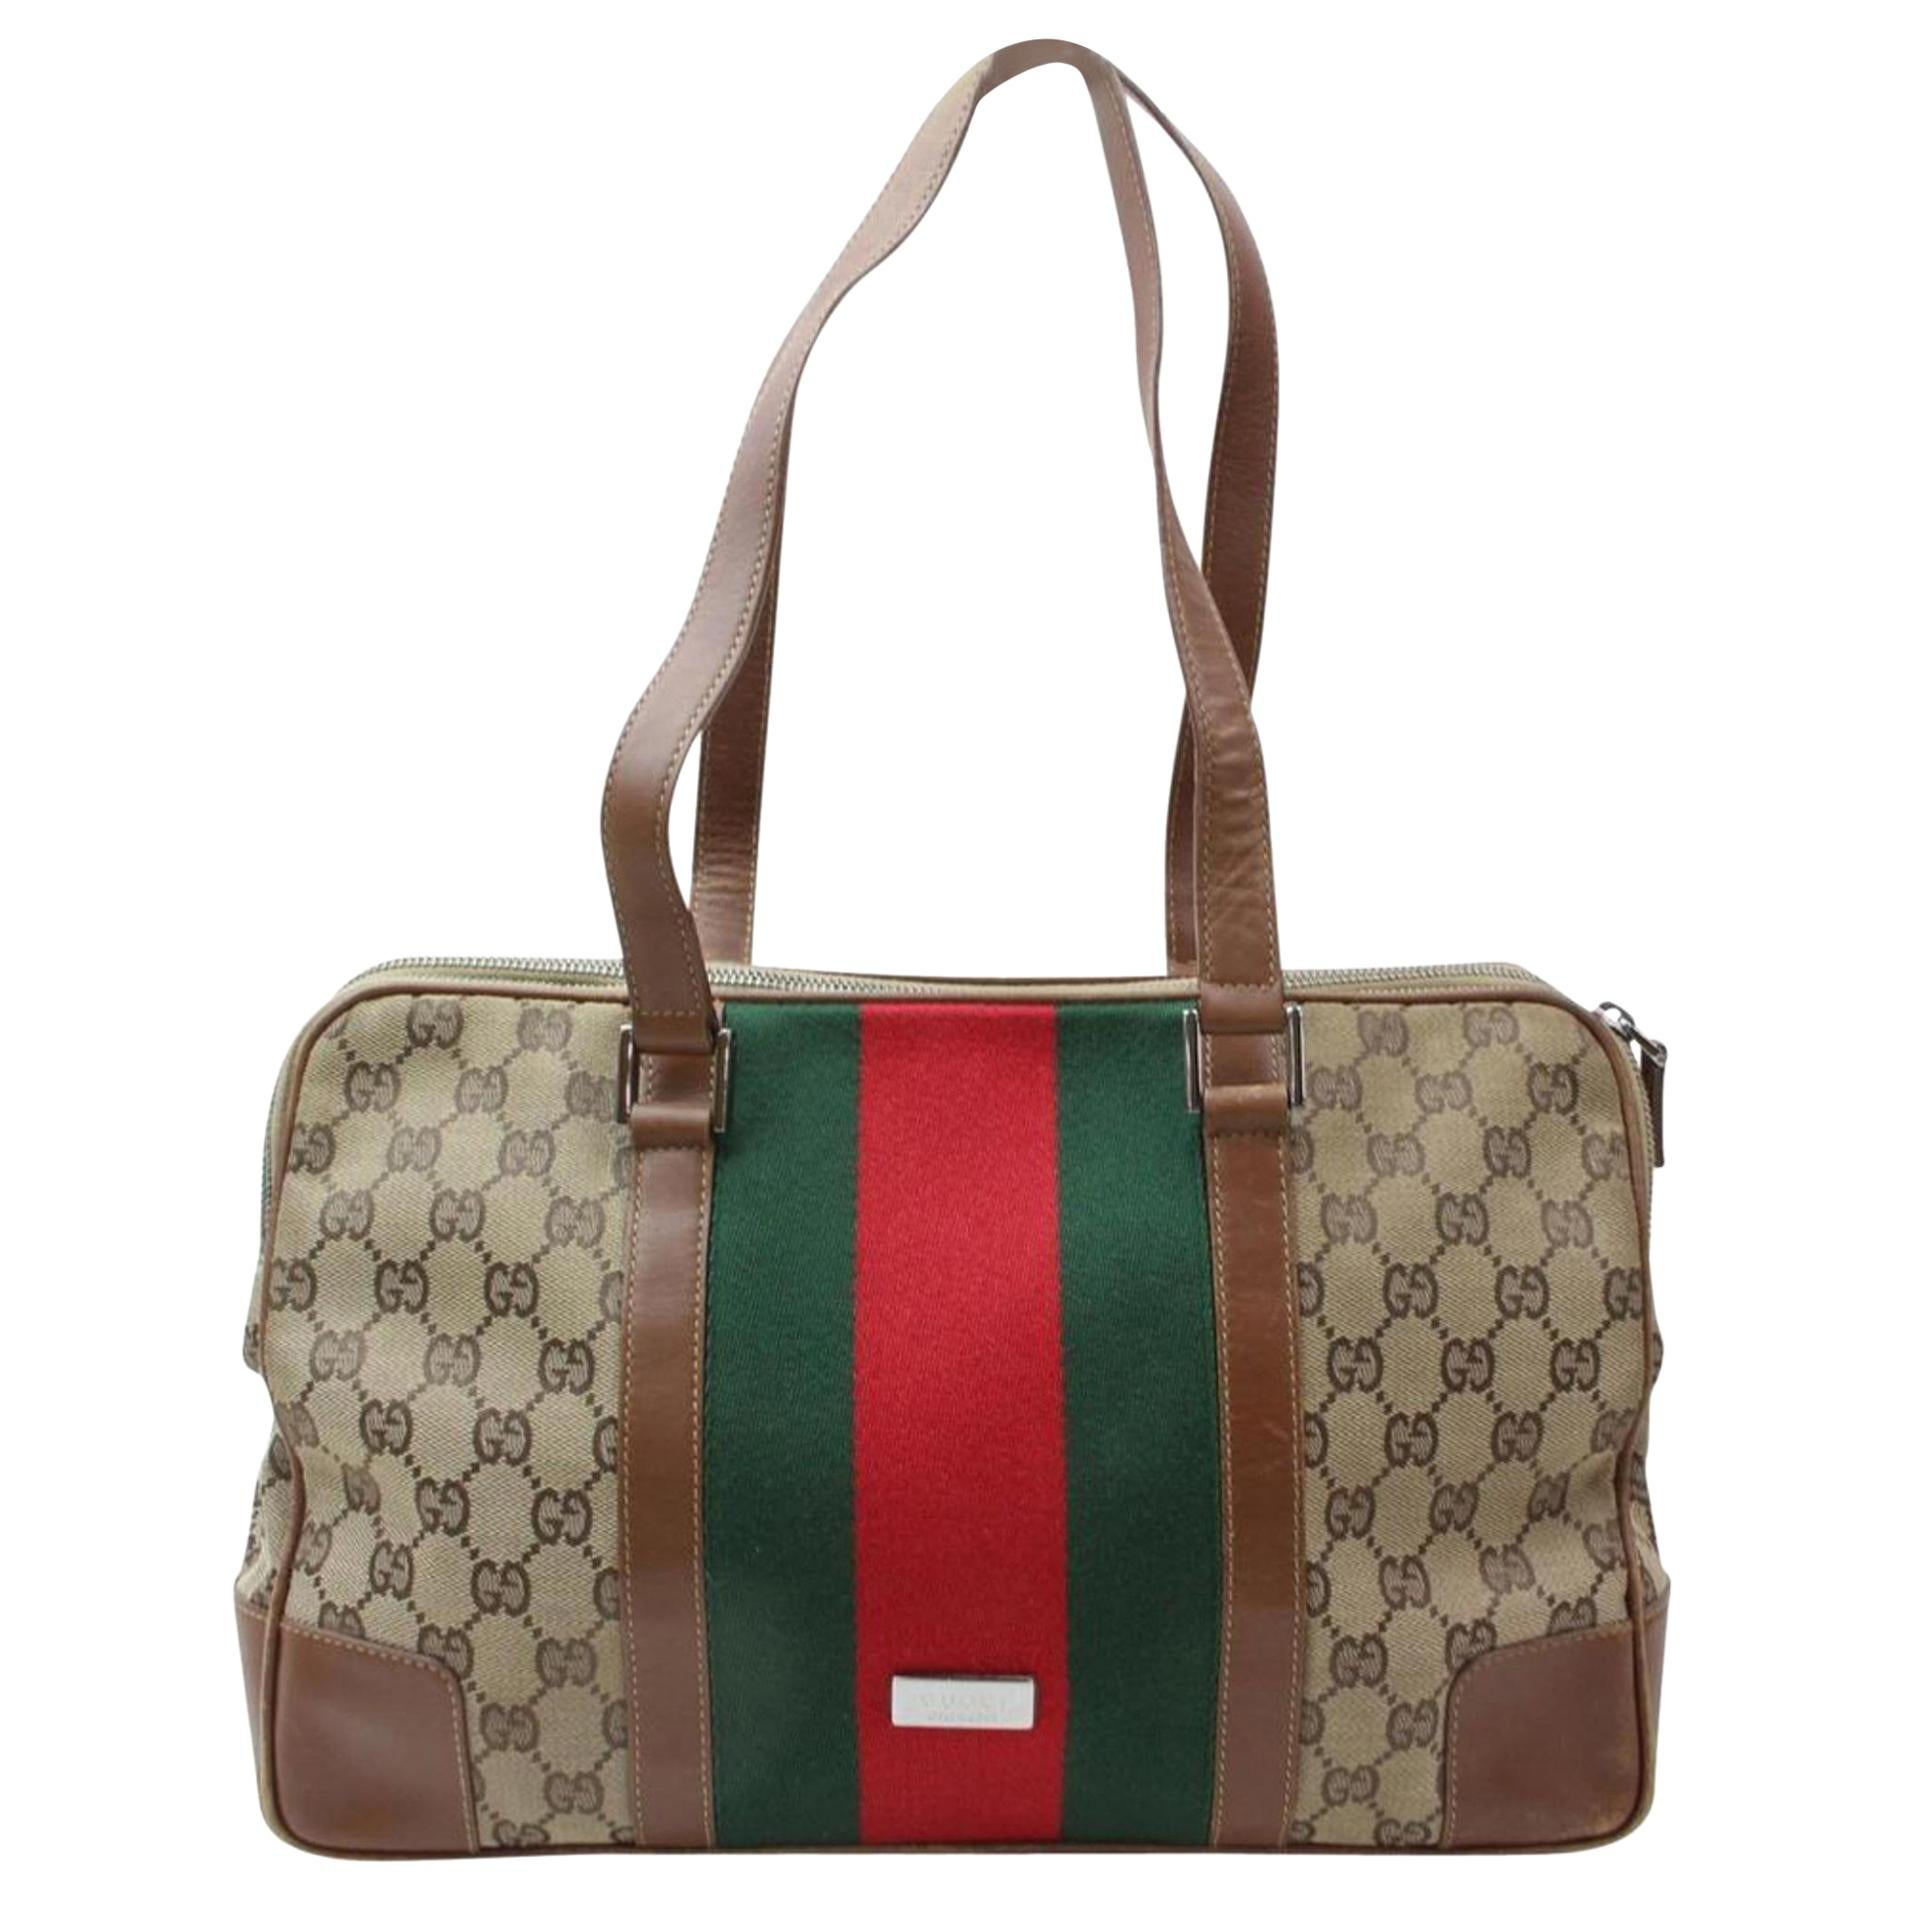 Gucci (Ultra Rare) Sherry Monogram Web Zip Tote 868472 Brown Canvas Shoulder Bag For Sale